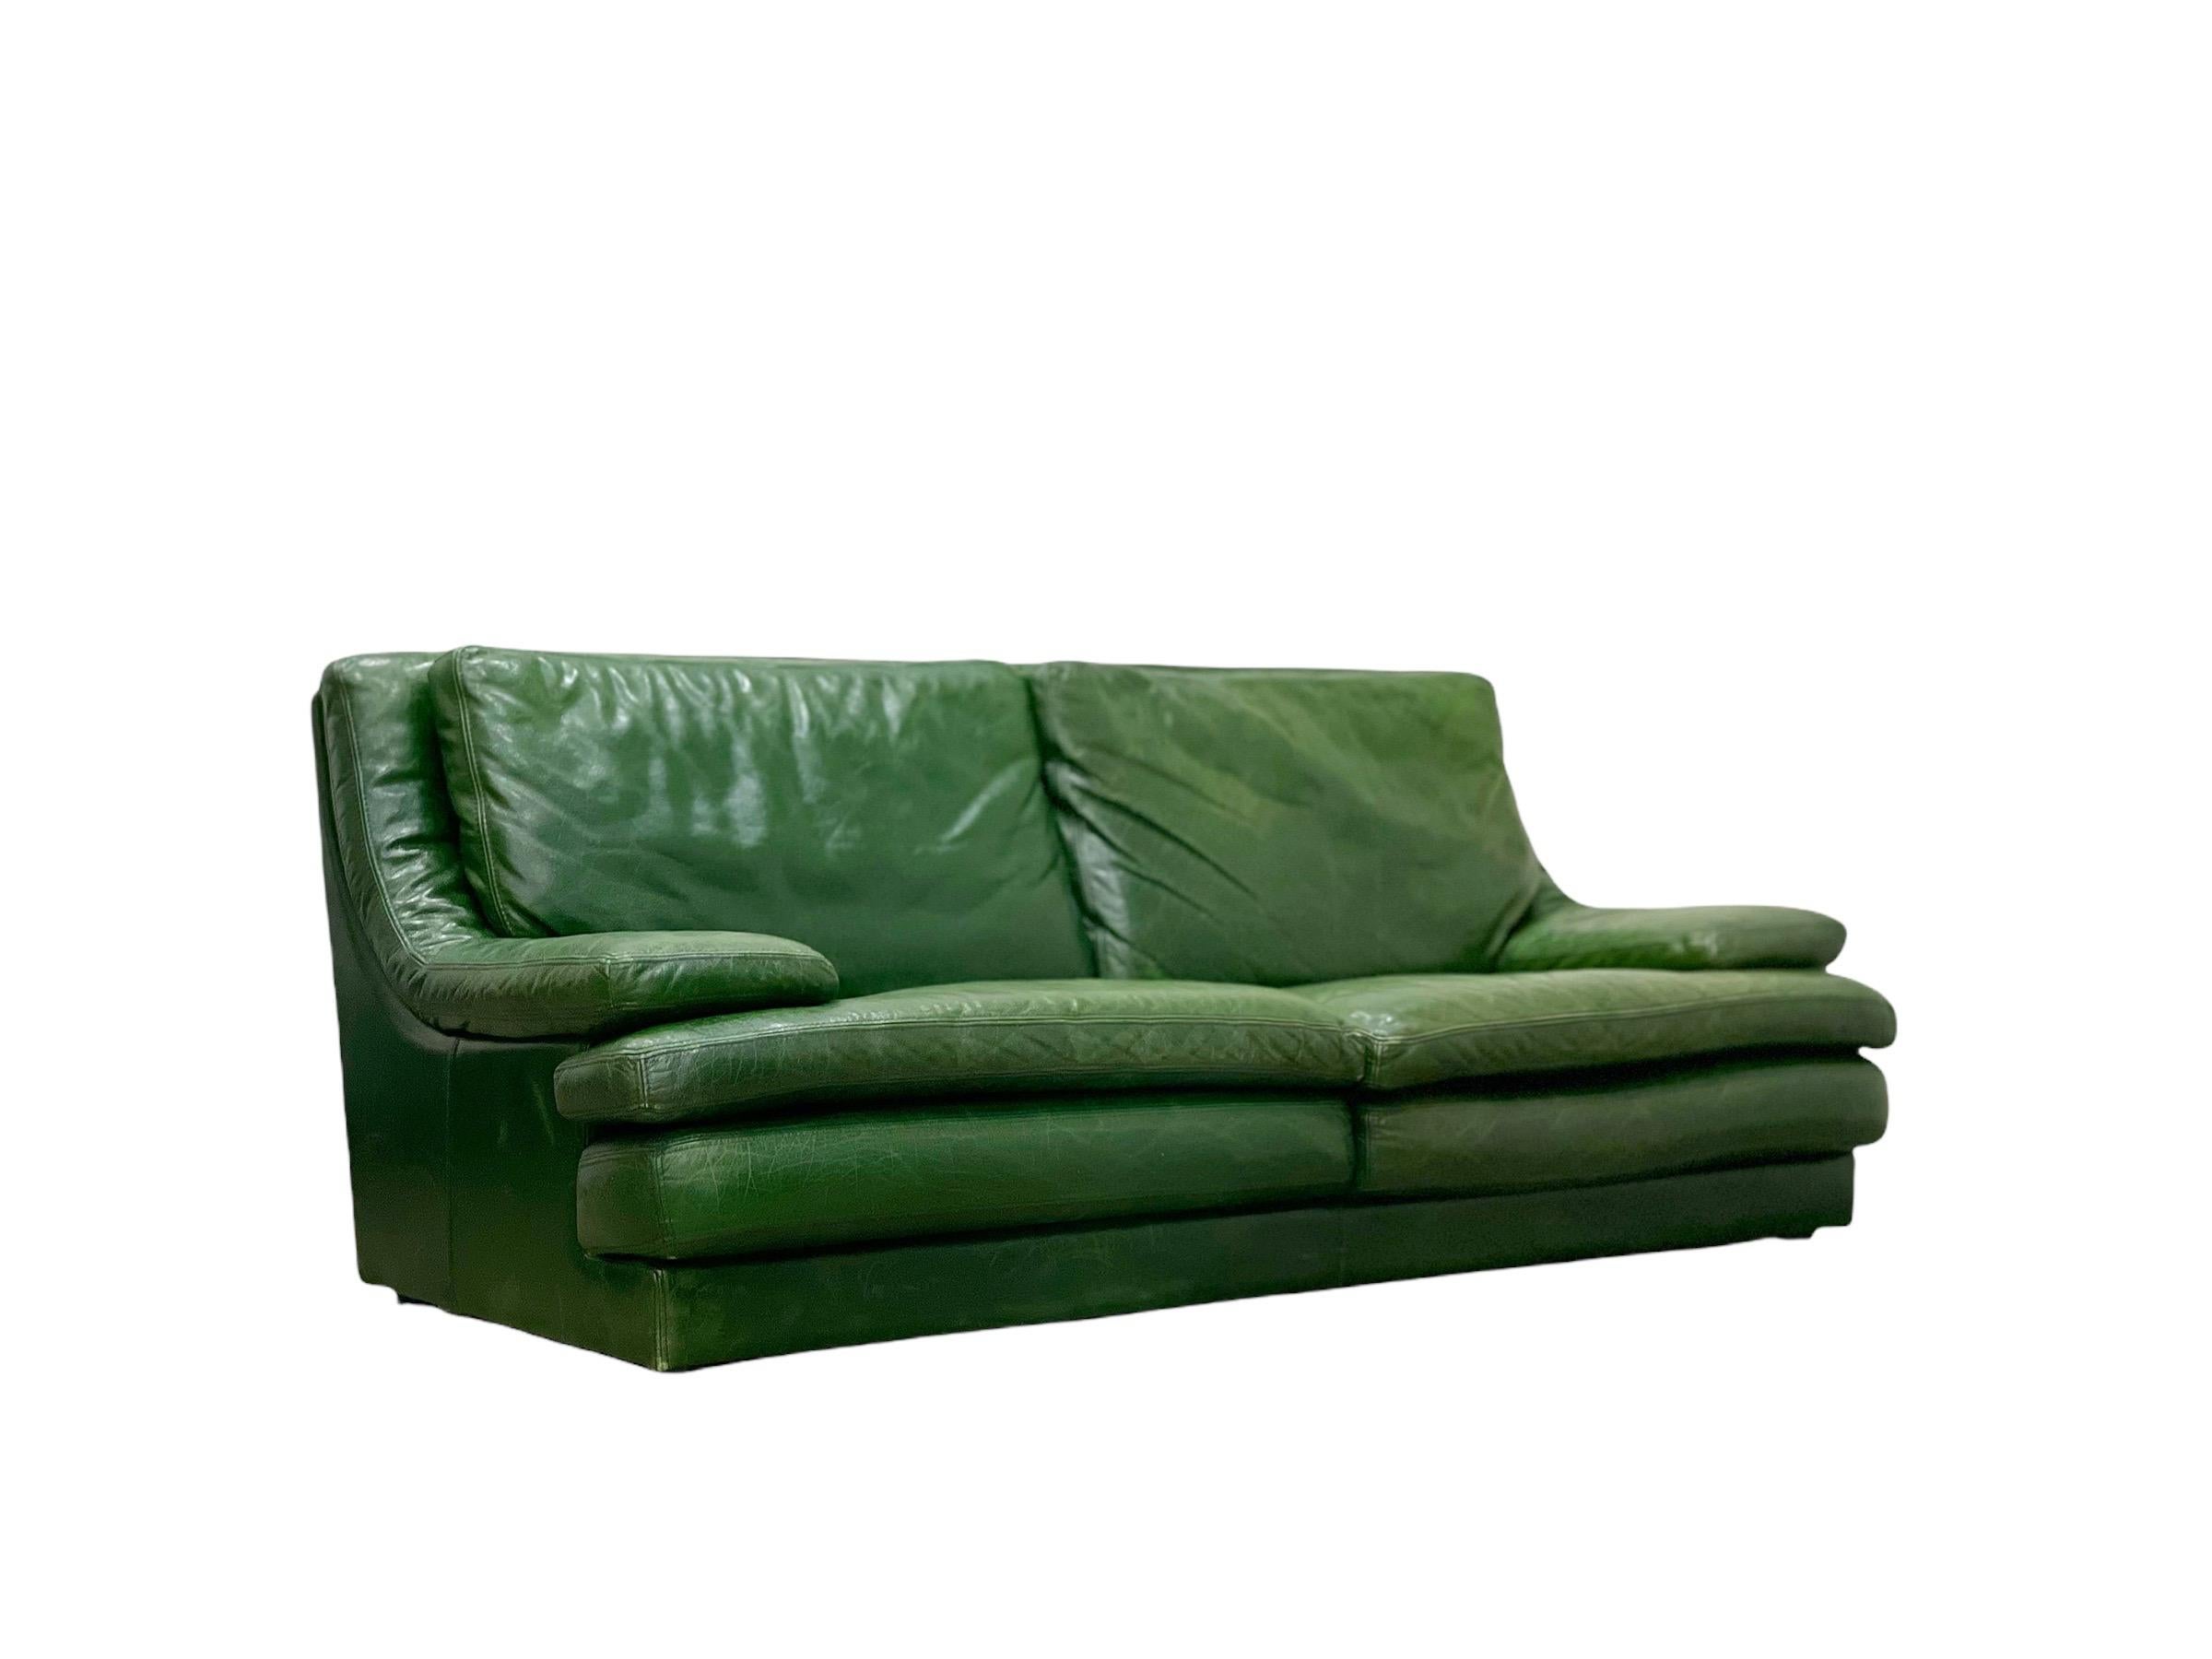 Extraordinary post modern sofa and loveseat by Roche Bobois in green leather. Supreme comfort and unmatched craftsmanship. Aniline dyed British Racing Green (BRG) leather is soft and supple and worn in perfectly. Luxurious stacked cushions and an